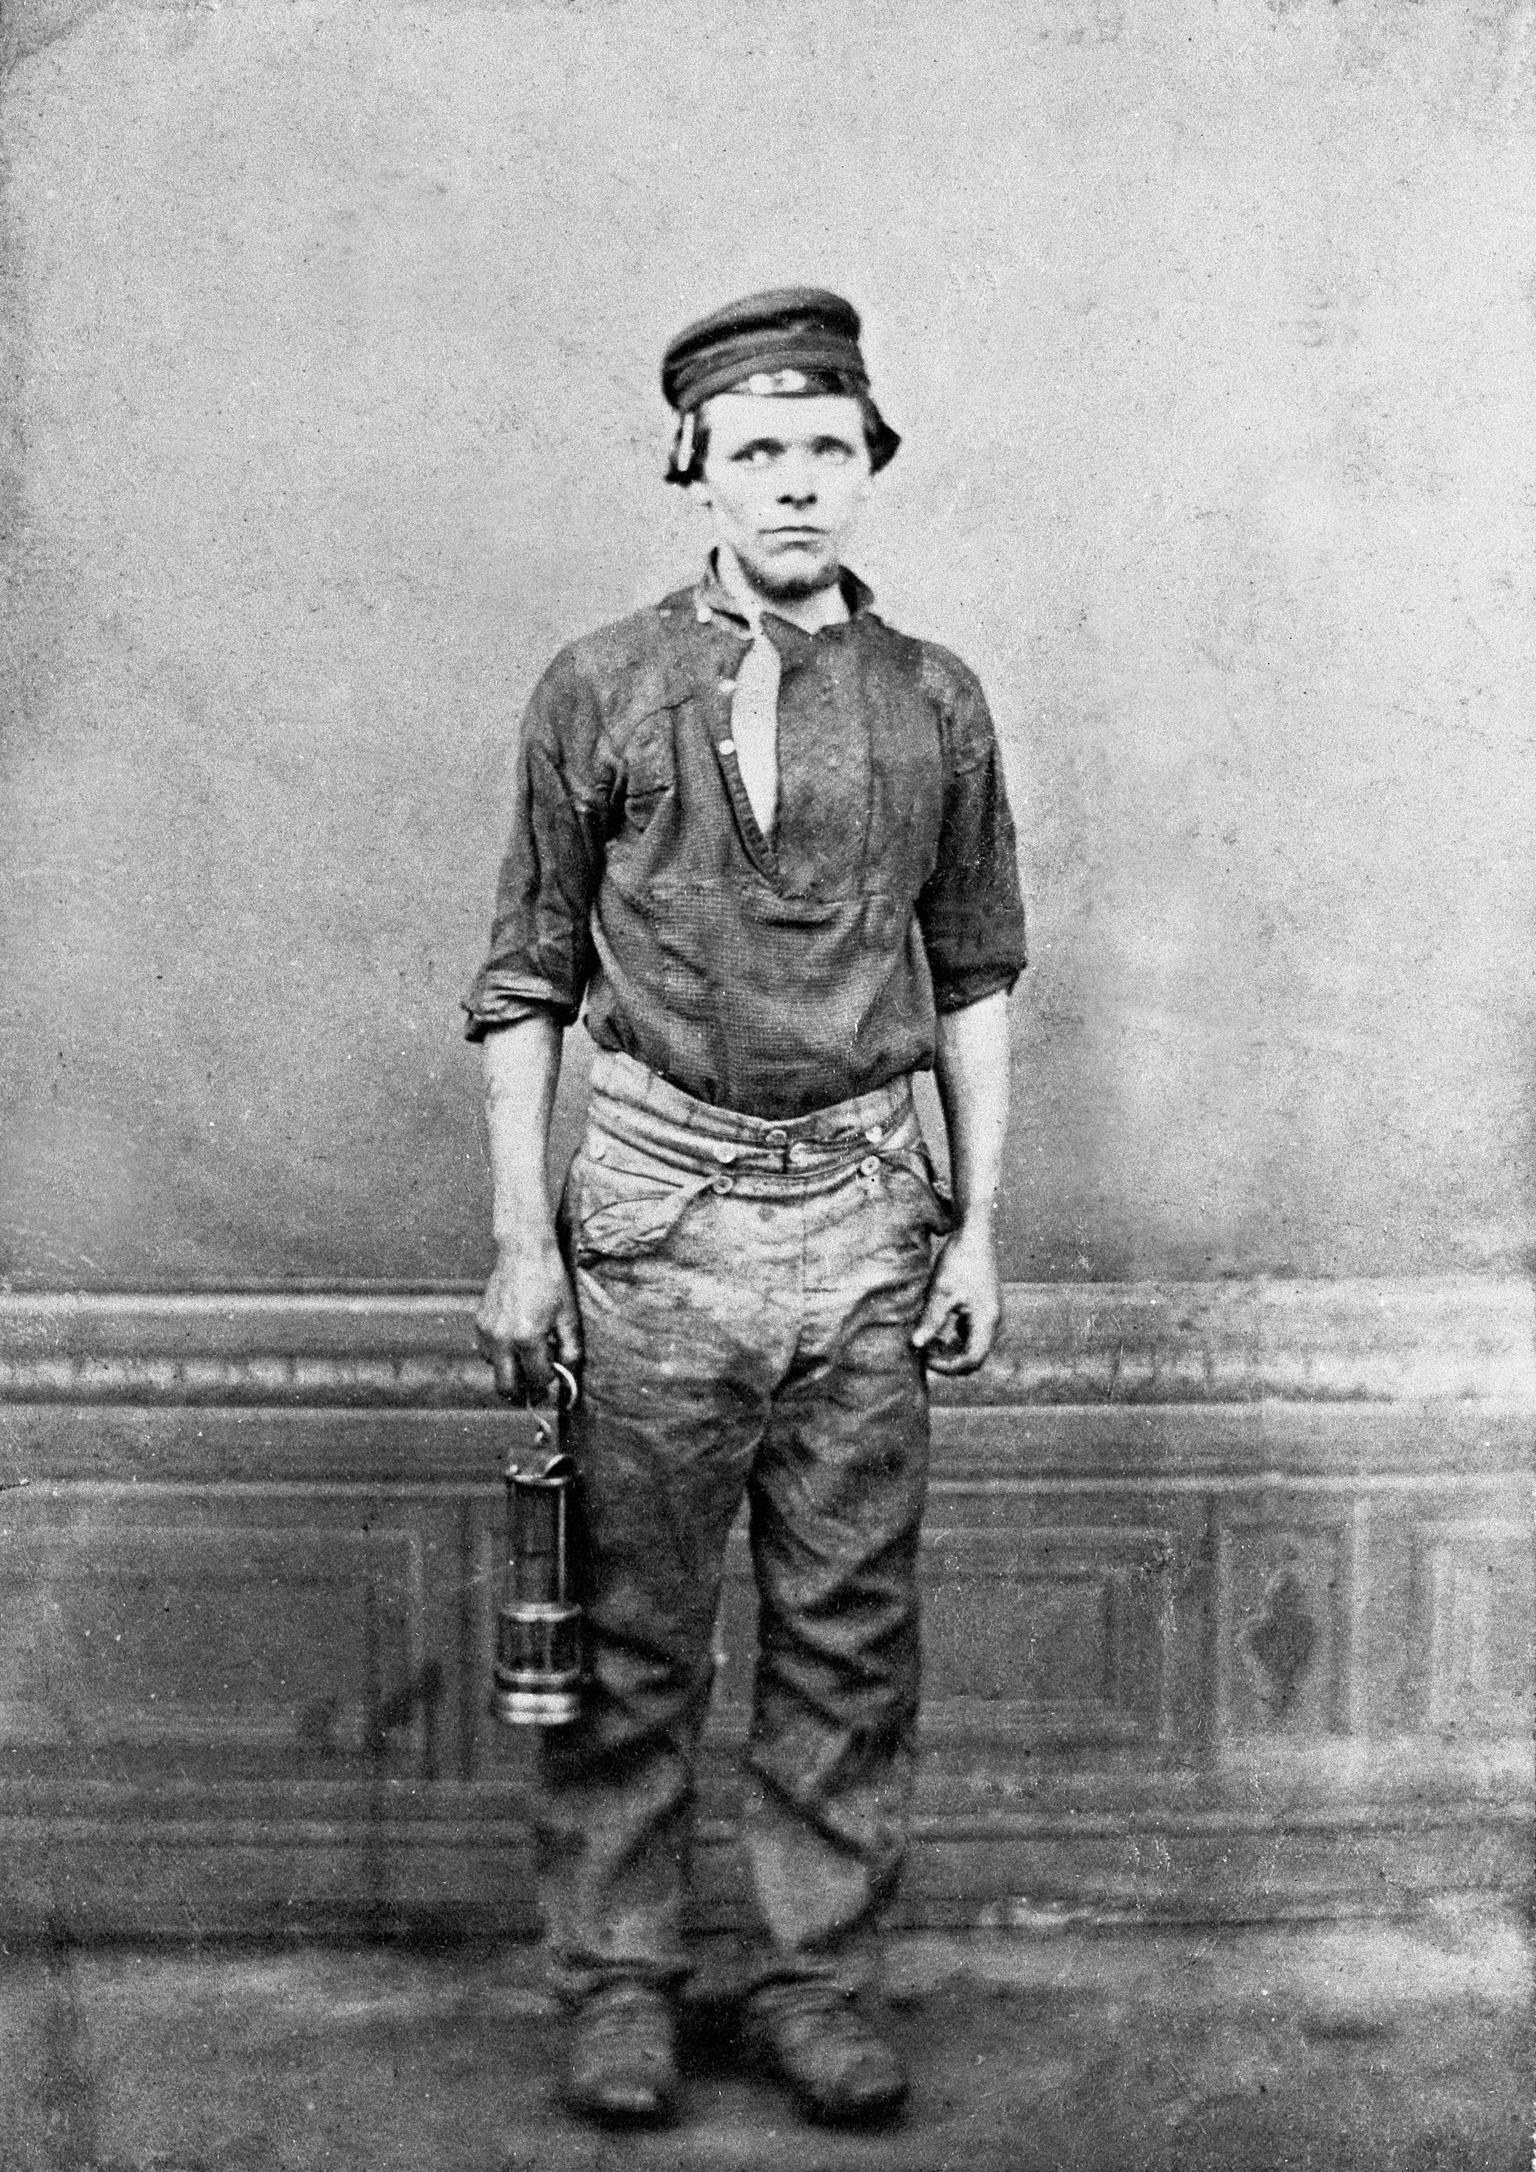 Colliery worker, photograph